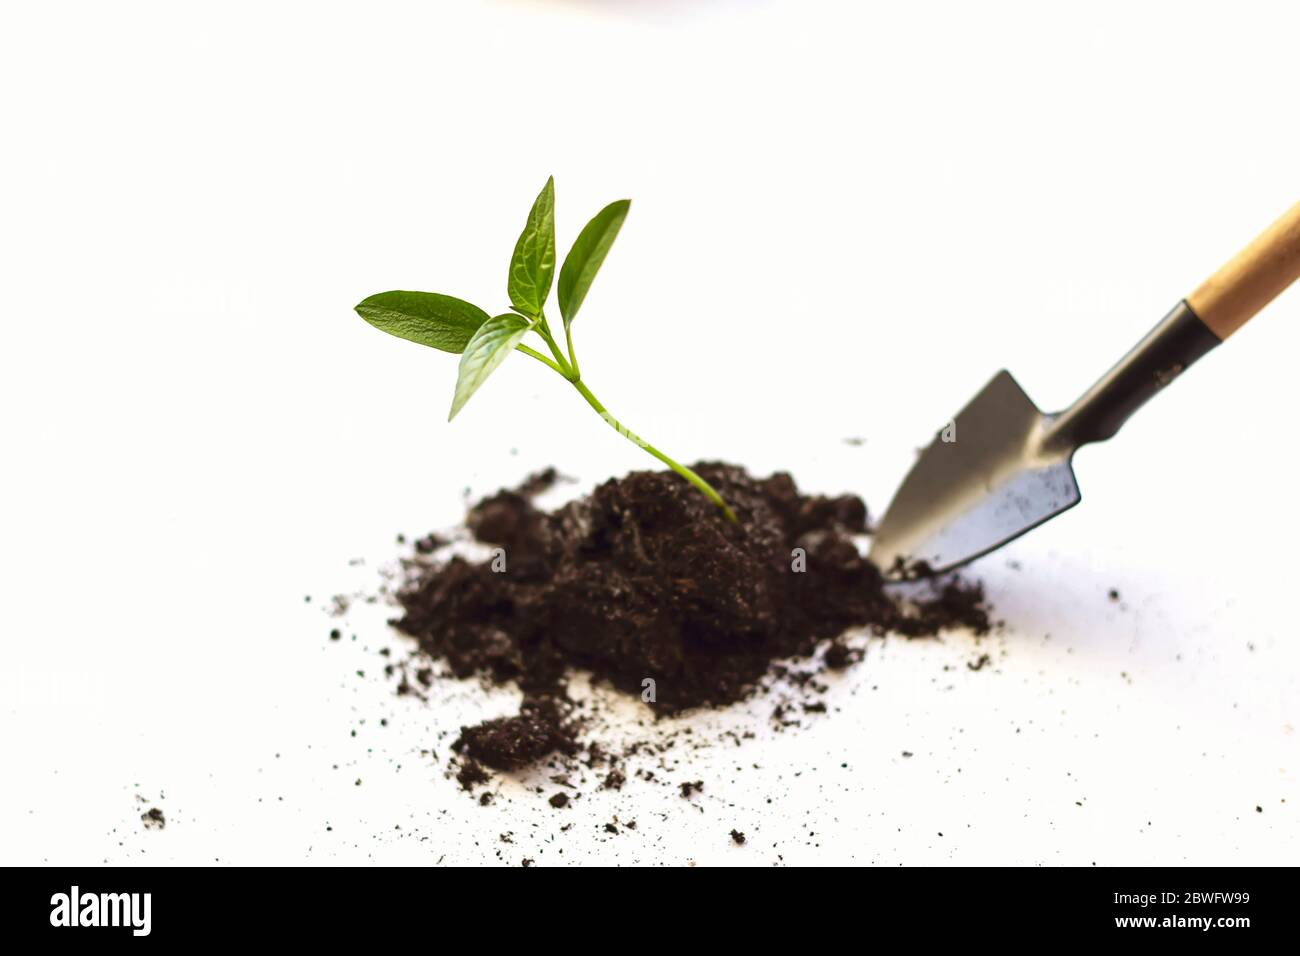 garden tool shovel with wooden handles on a white background. Seedlings are growing from arid soil with morning sun is shining, concept of global warm Stock Photo